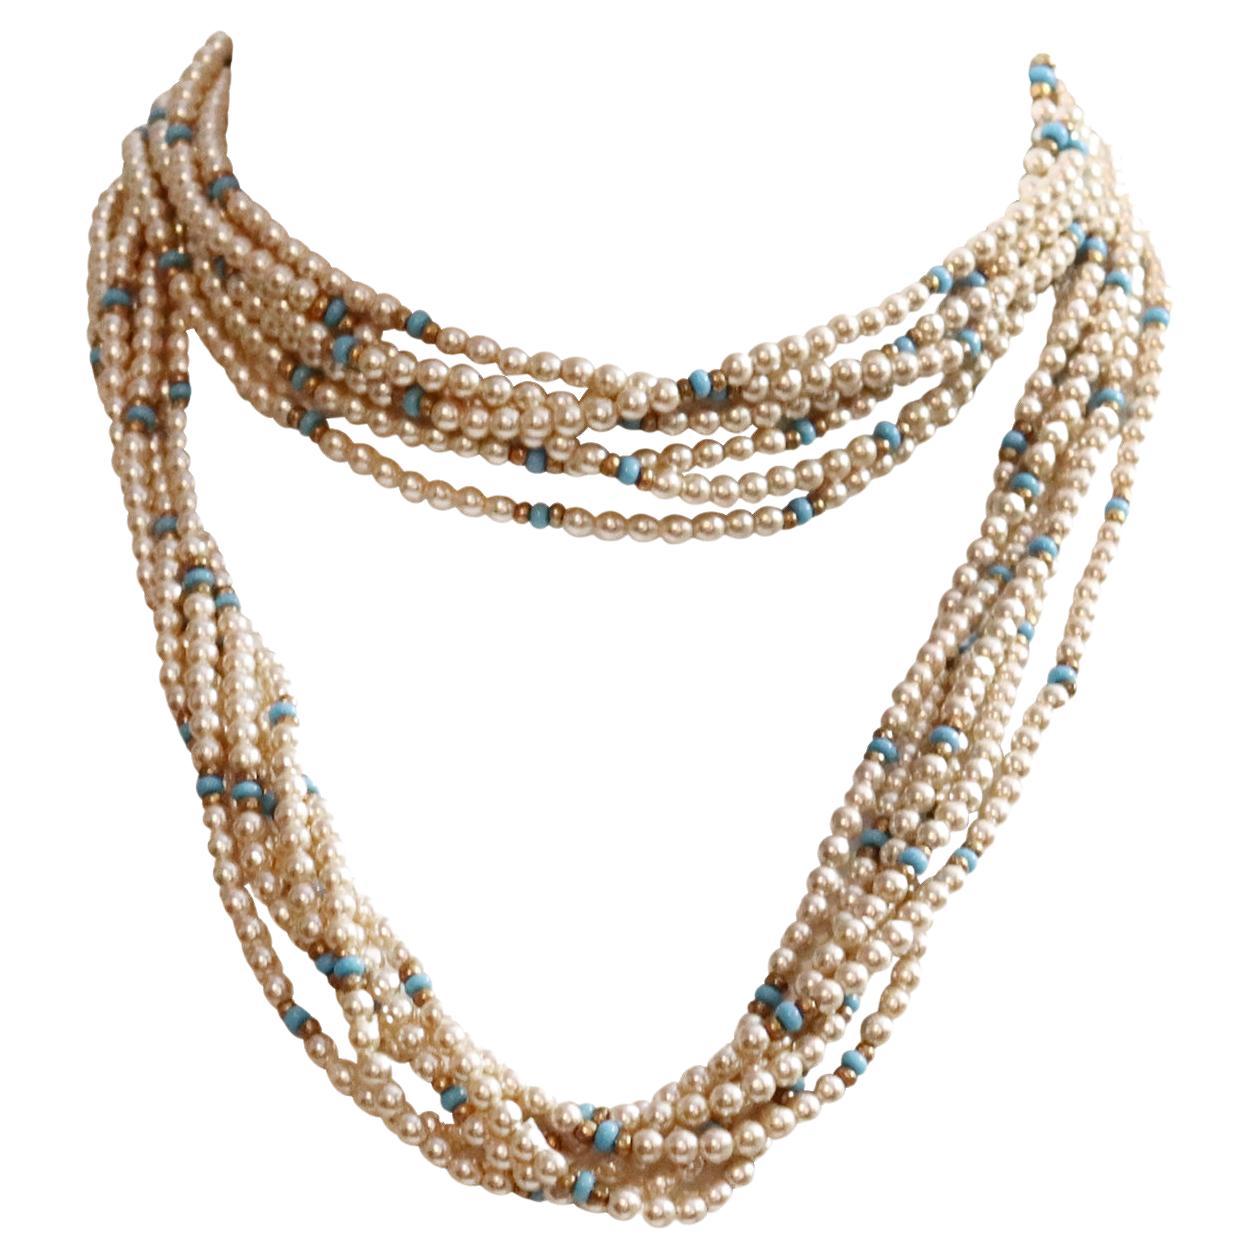 Vintage Faux Pearl and Faux Turquoise With Gold Beads Necklace Circa 1990s